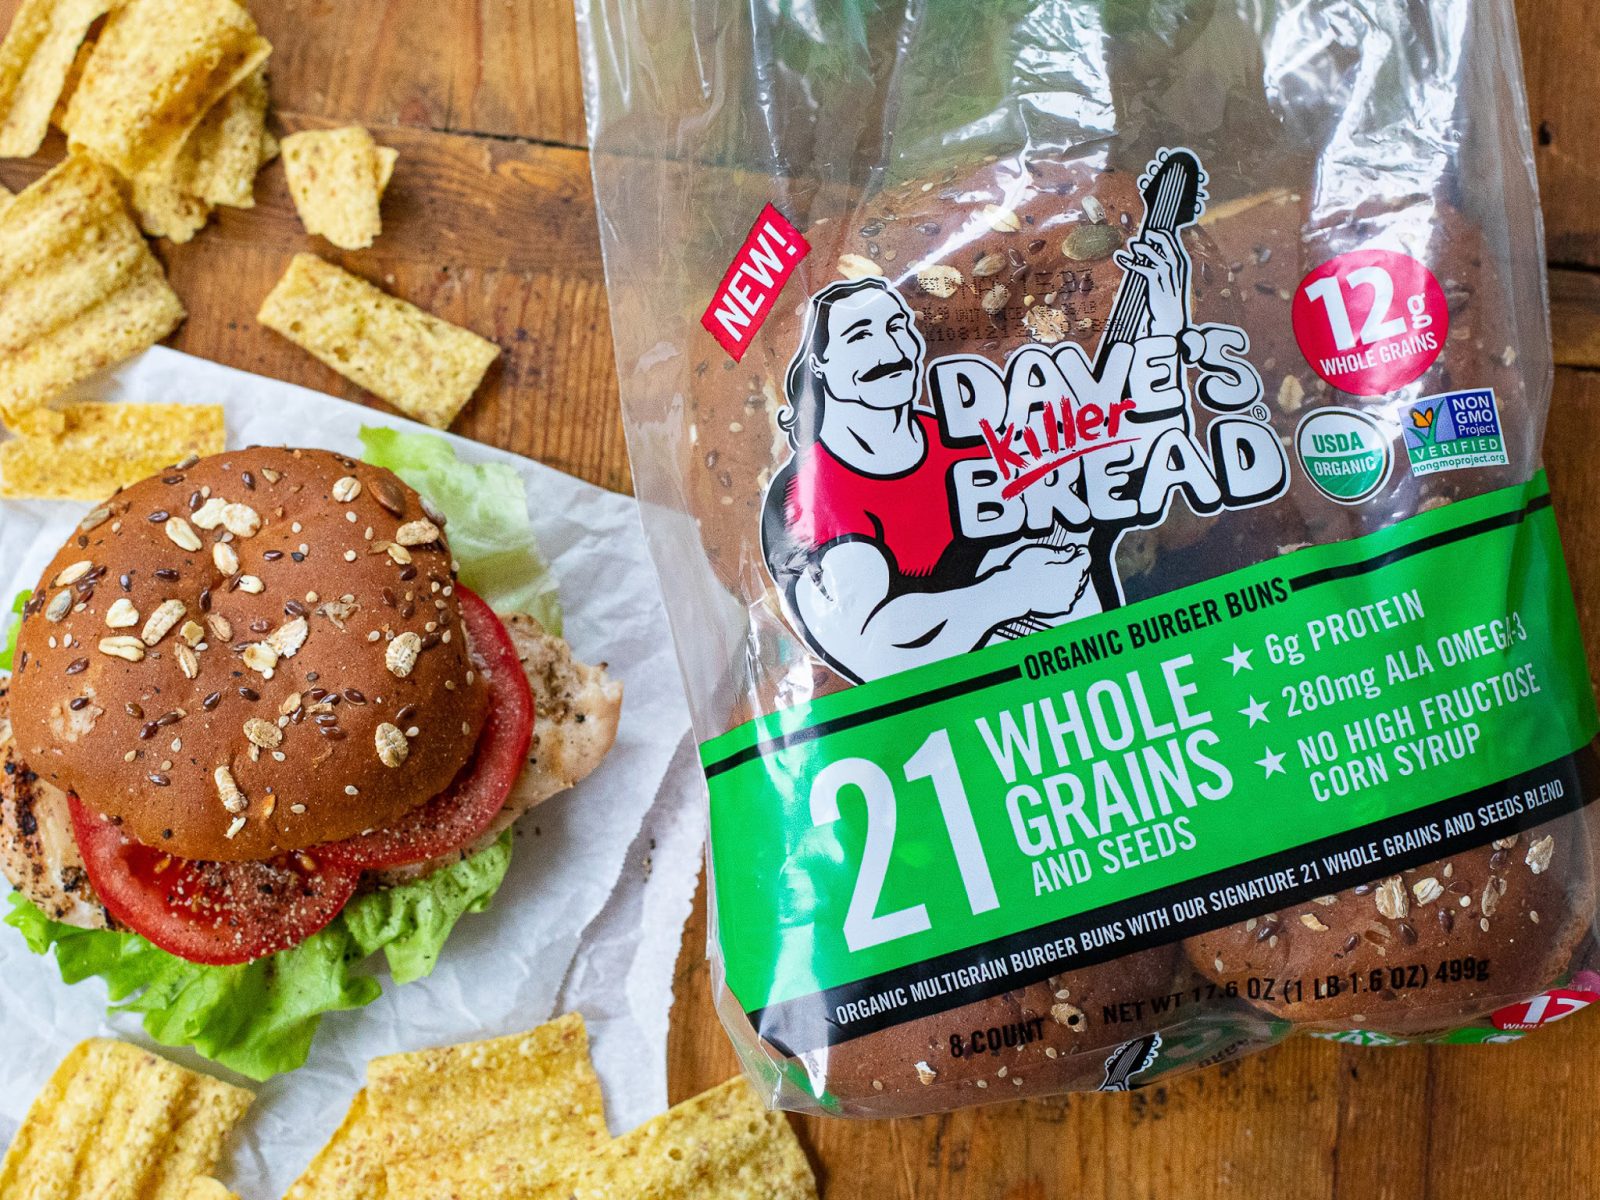 Dave’s Killer Bread Thin-Sliced Bread As Low As $3.49 At Kroger (Regular Price $6.99)